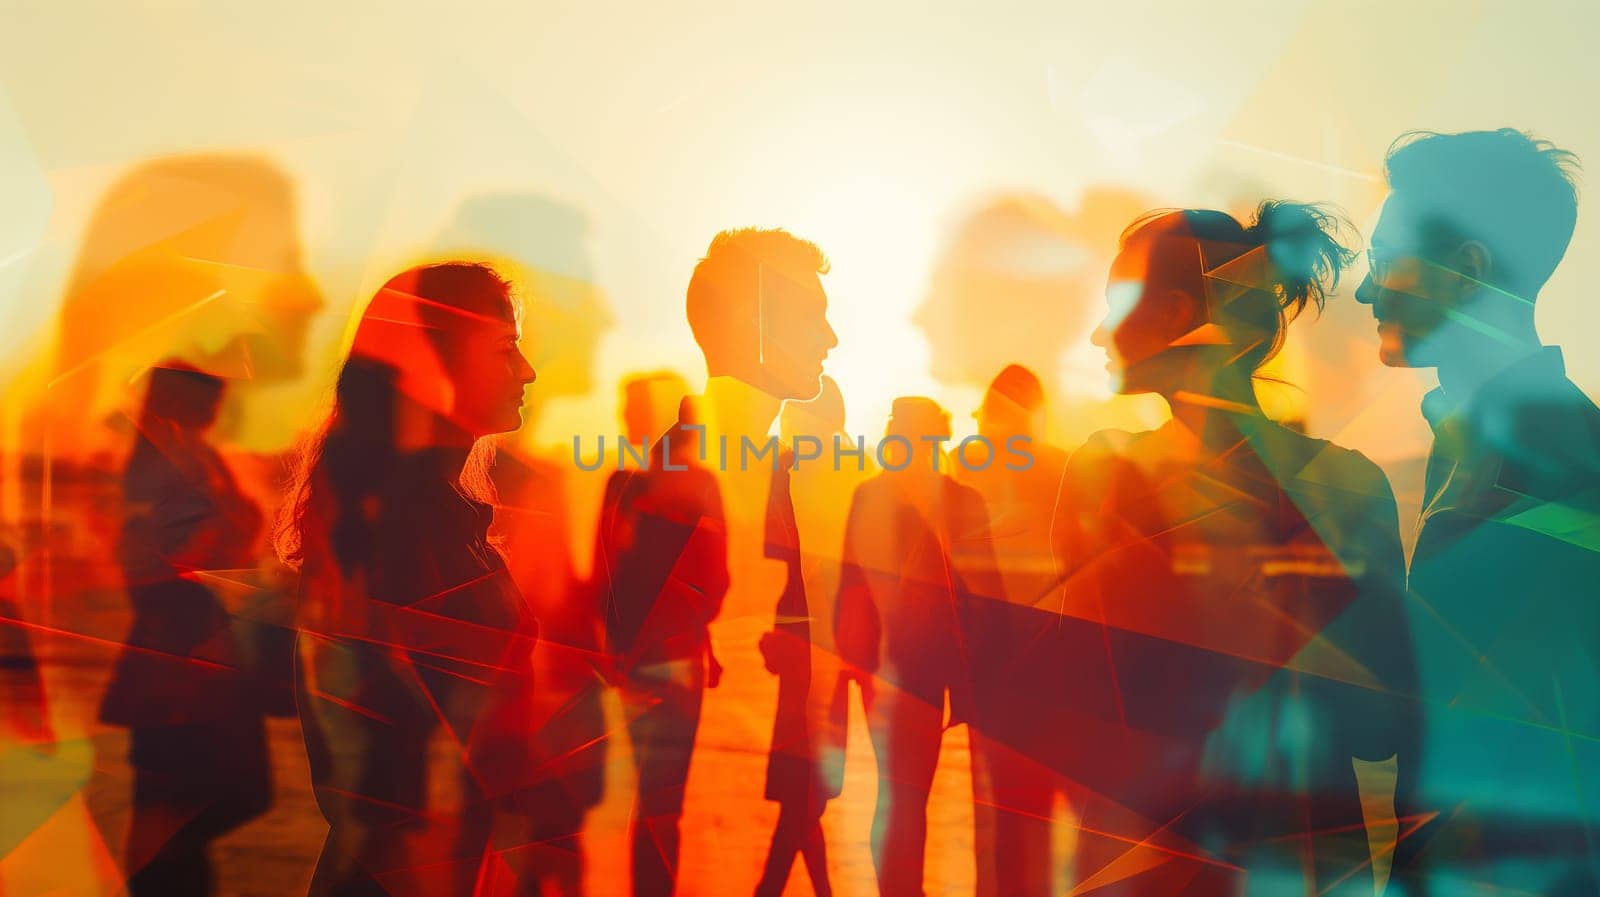 abstract image of bustling City Street at Sunset With Pedestrians in Silhouette by chrisroll